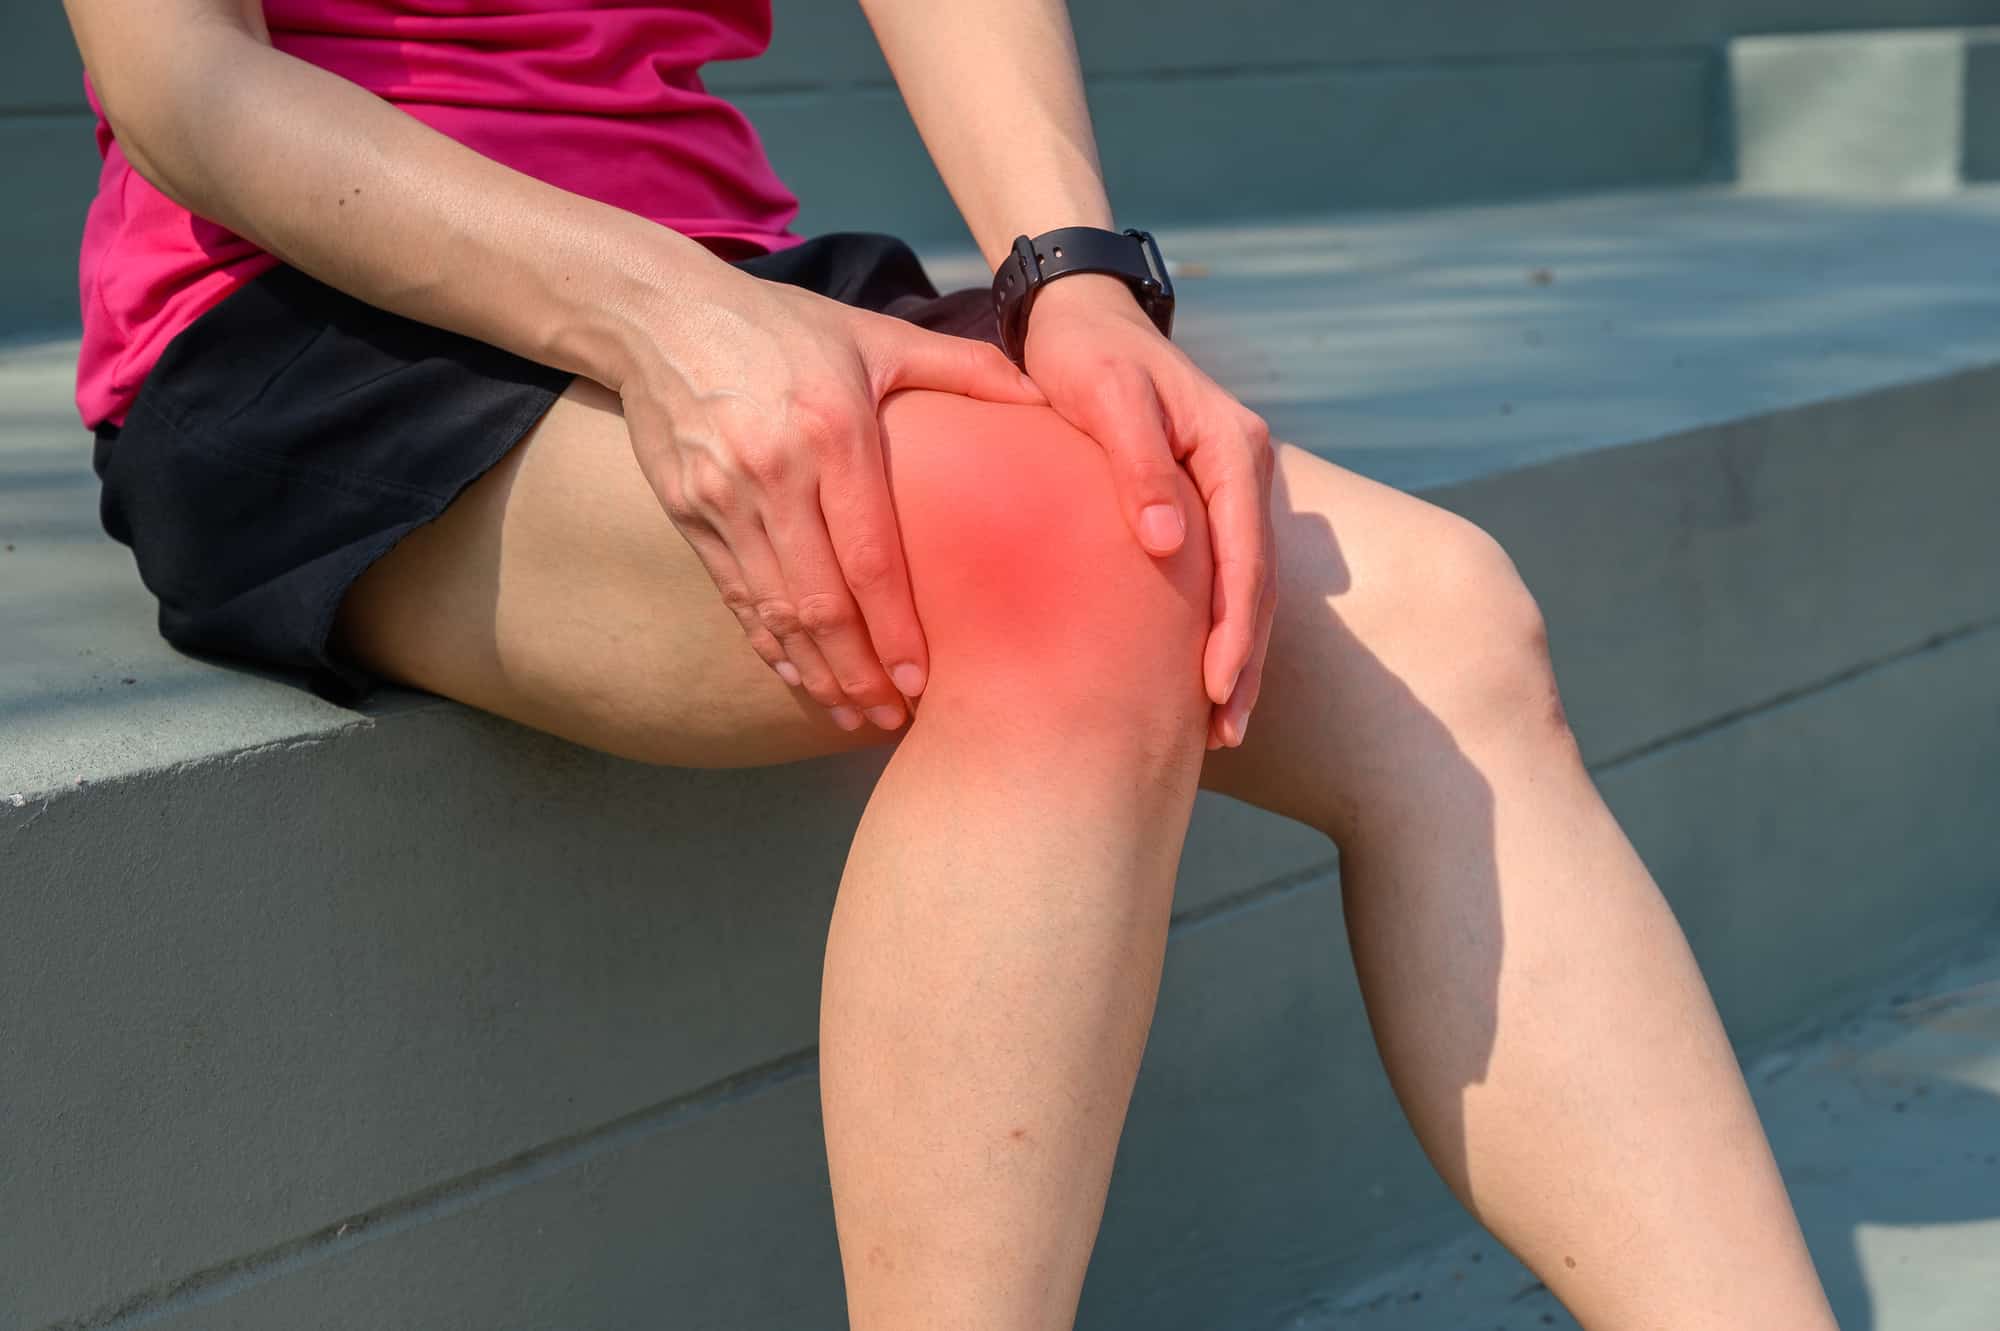 Close up of woman runner suffering from Iliotibial Band Syndrome (ITB). It cause from overuse injury causing pain on the outside part of the knee and outer thigh